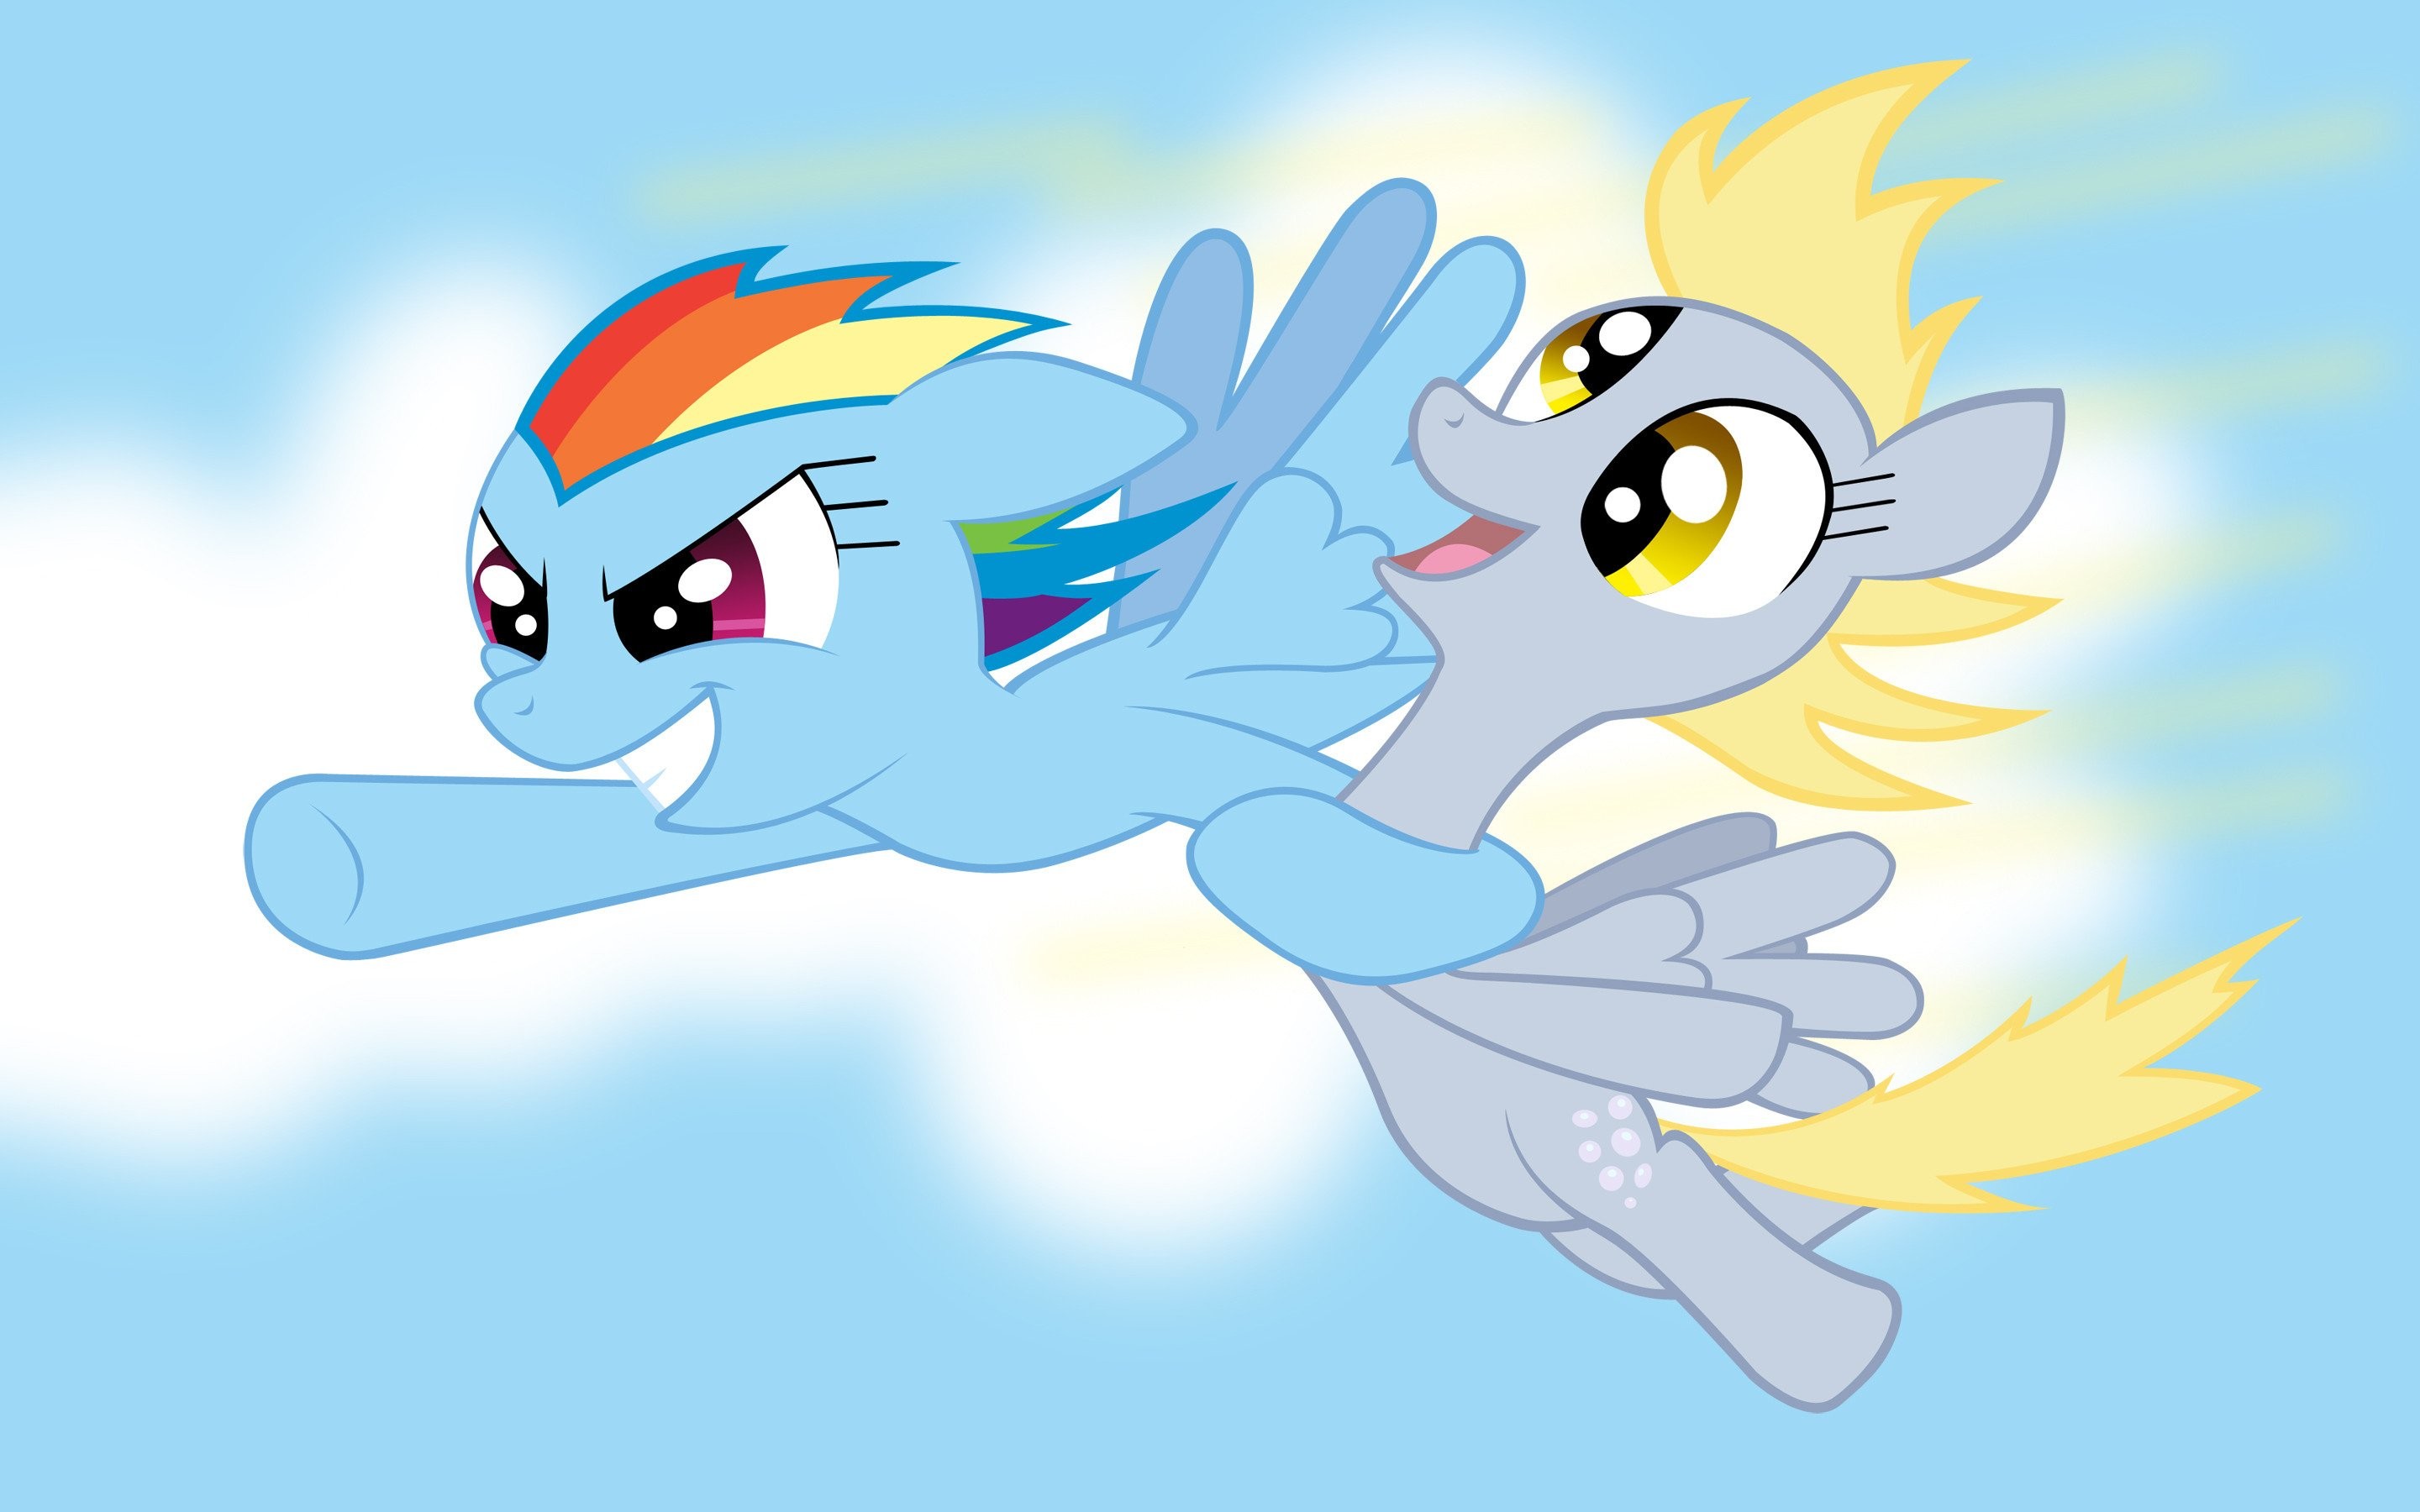 2880x1800 Derpy Hooves And Rainbow Dash 455868. SHARE. TAGS: Derpy Hooves MLP ...